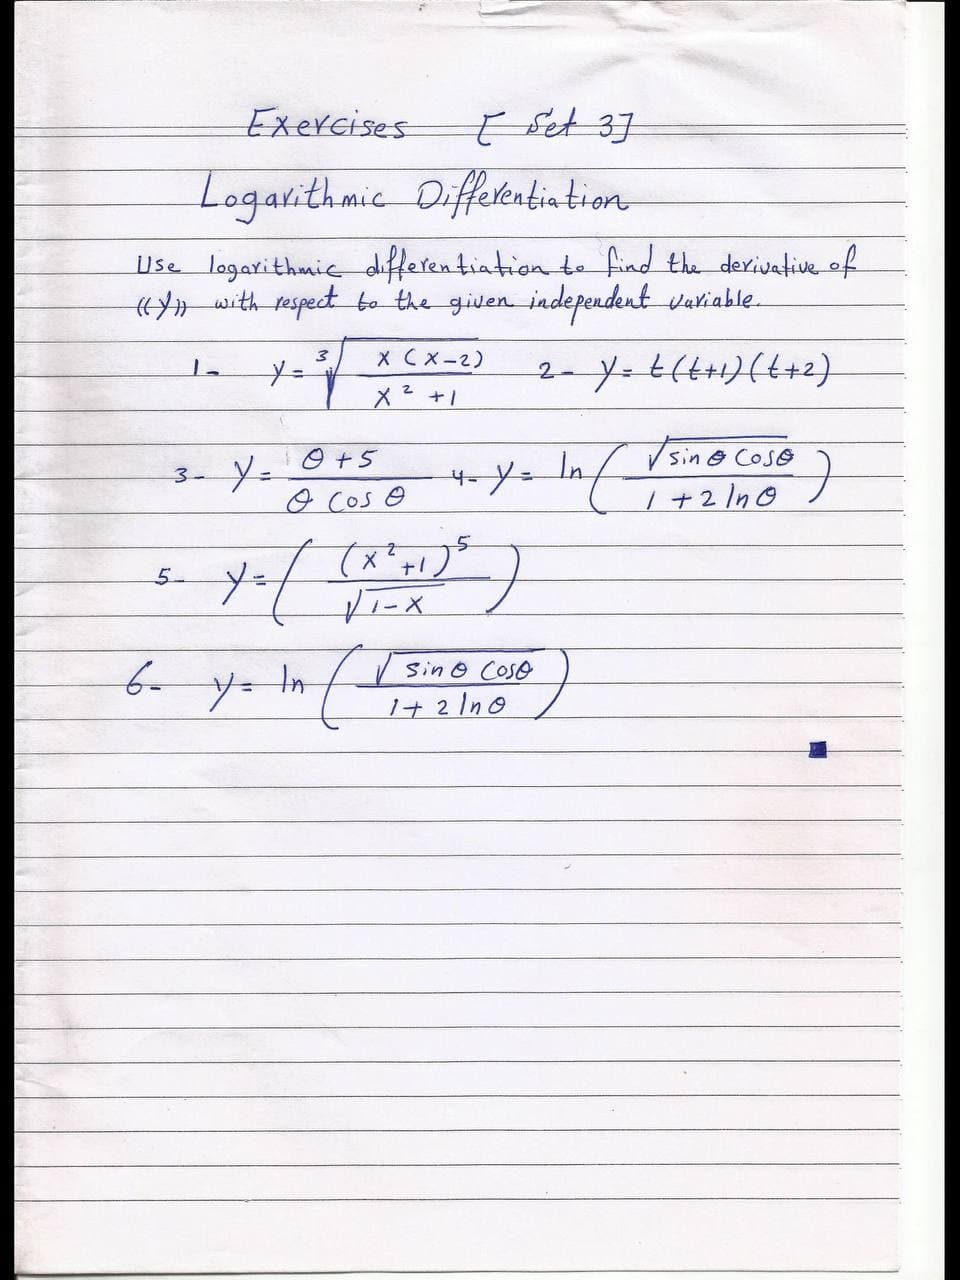 Exercises
E Set 37
Logarithmic
Diffetentintion
Use logarithmie differentiation te find the derivative of
with respect bo the given independent variable.
X CX-2)
メ+!
2-y.t(t+1)(t+2)
3-Y=
In
sin@ CoSe
O Cos e
| +2 In0
5-
Sin o Coso
yー
1+ 2 Ino
